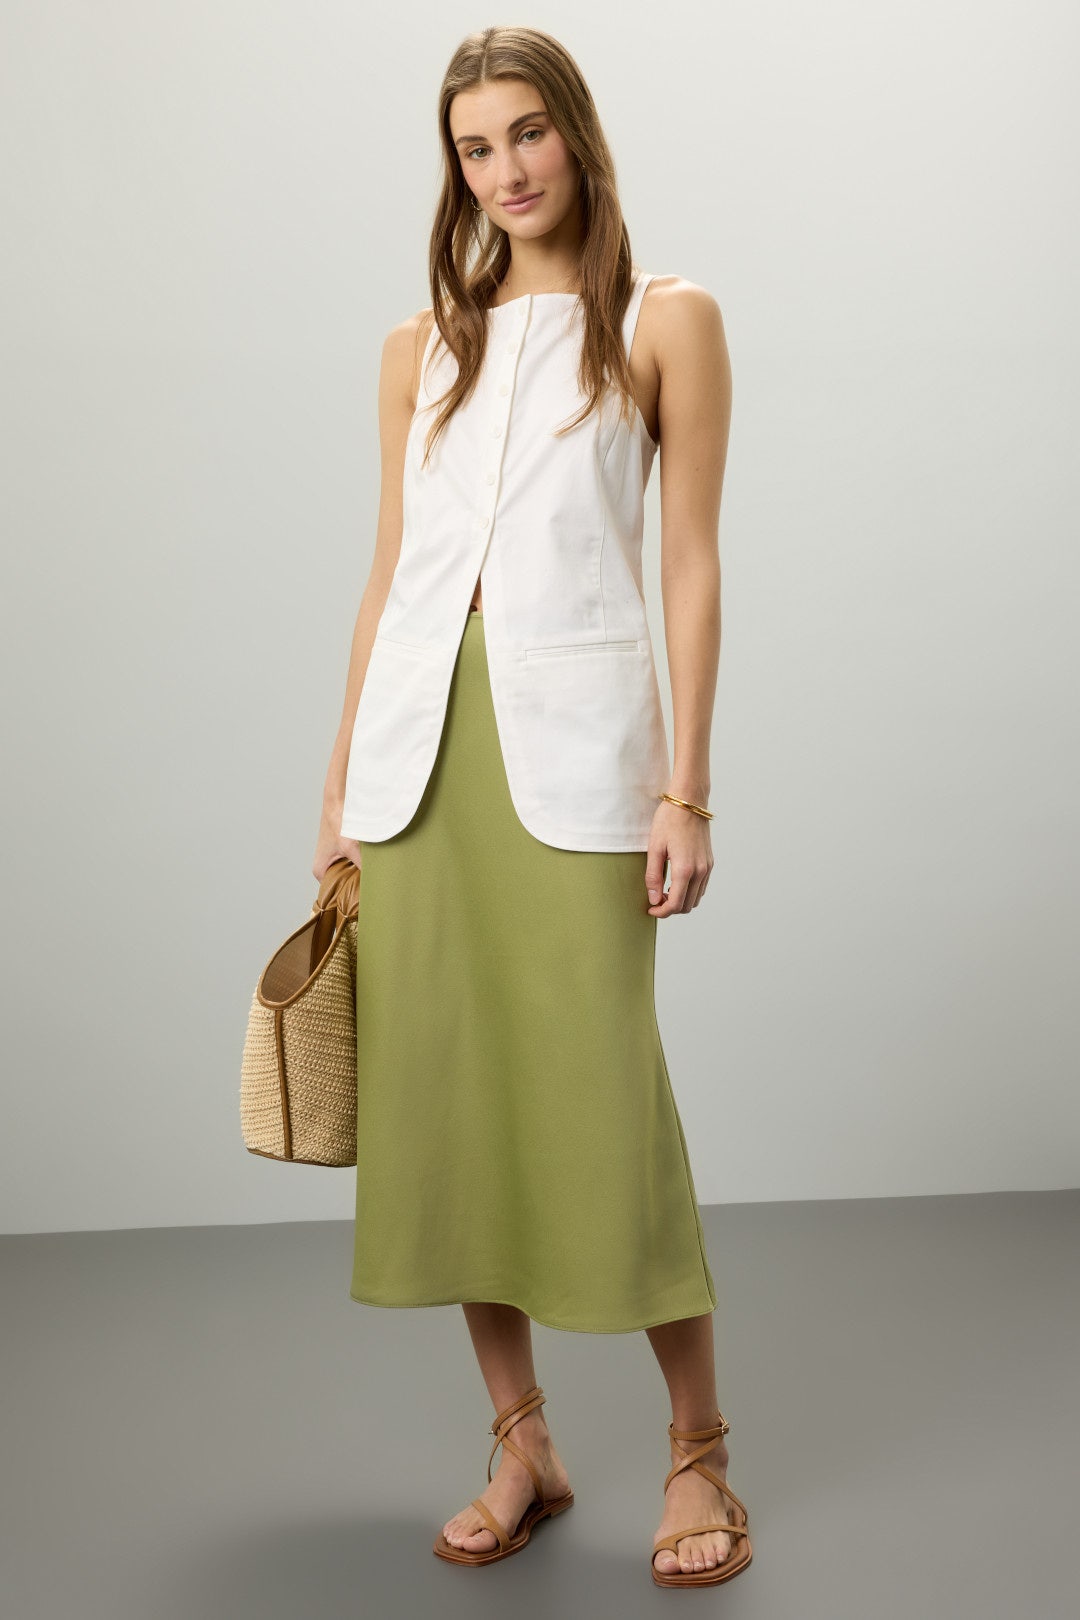 Rent the Runway Maeve Riley Collection Green Skirt.